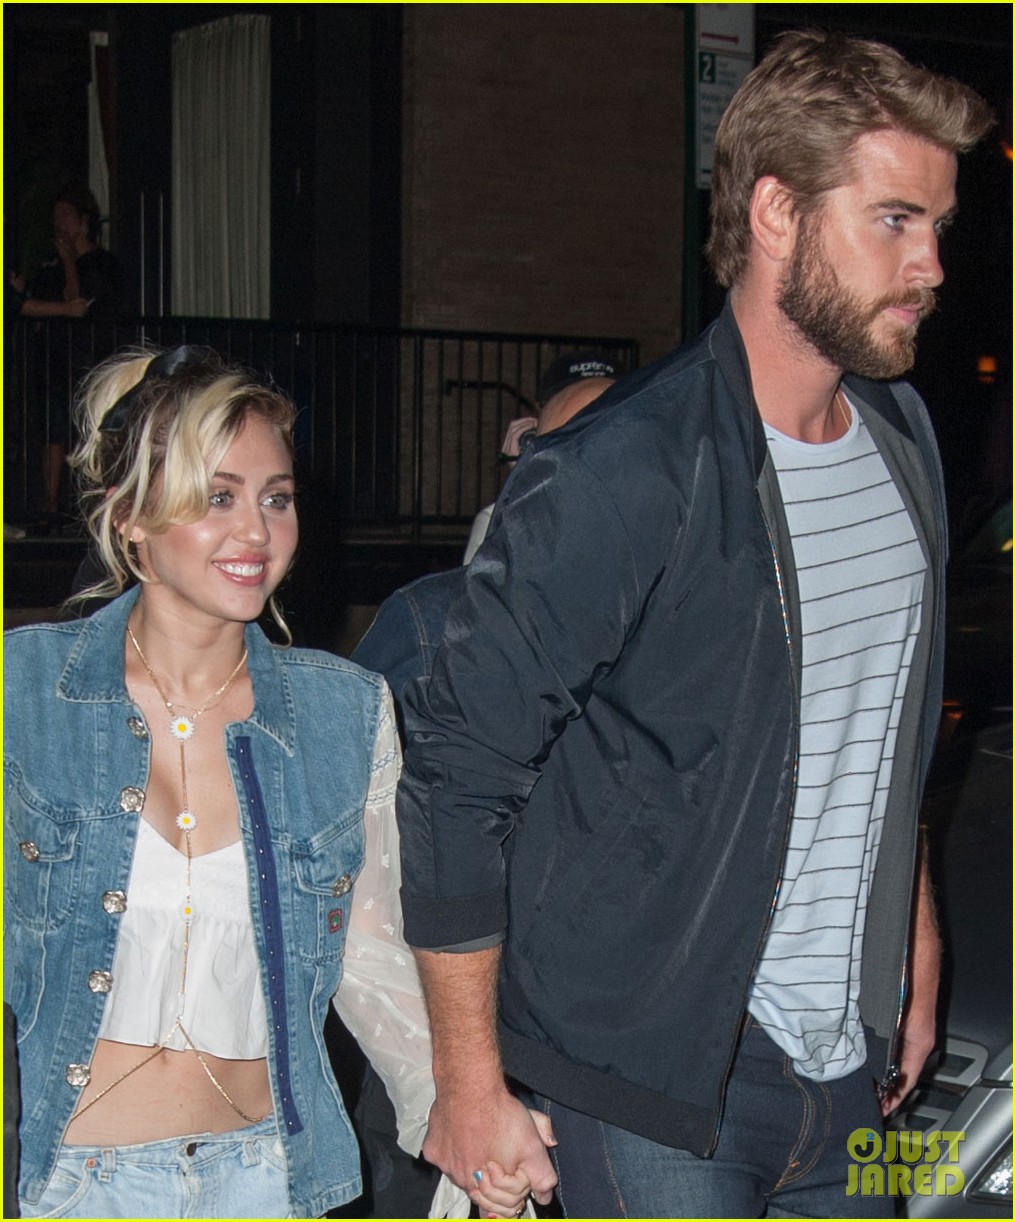 miley cyrus liam hemsworth have a date night after fallon taping 06